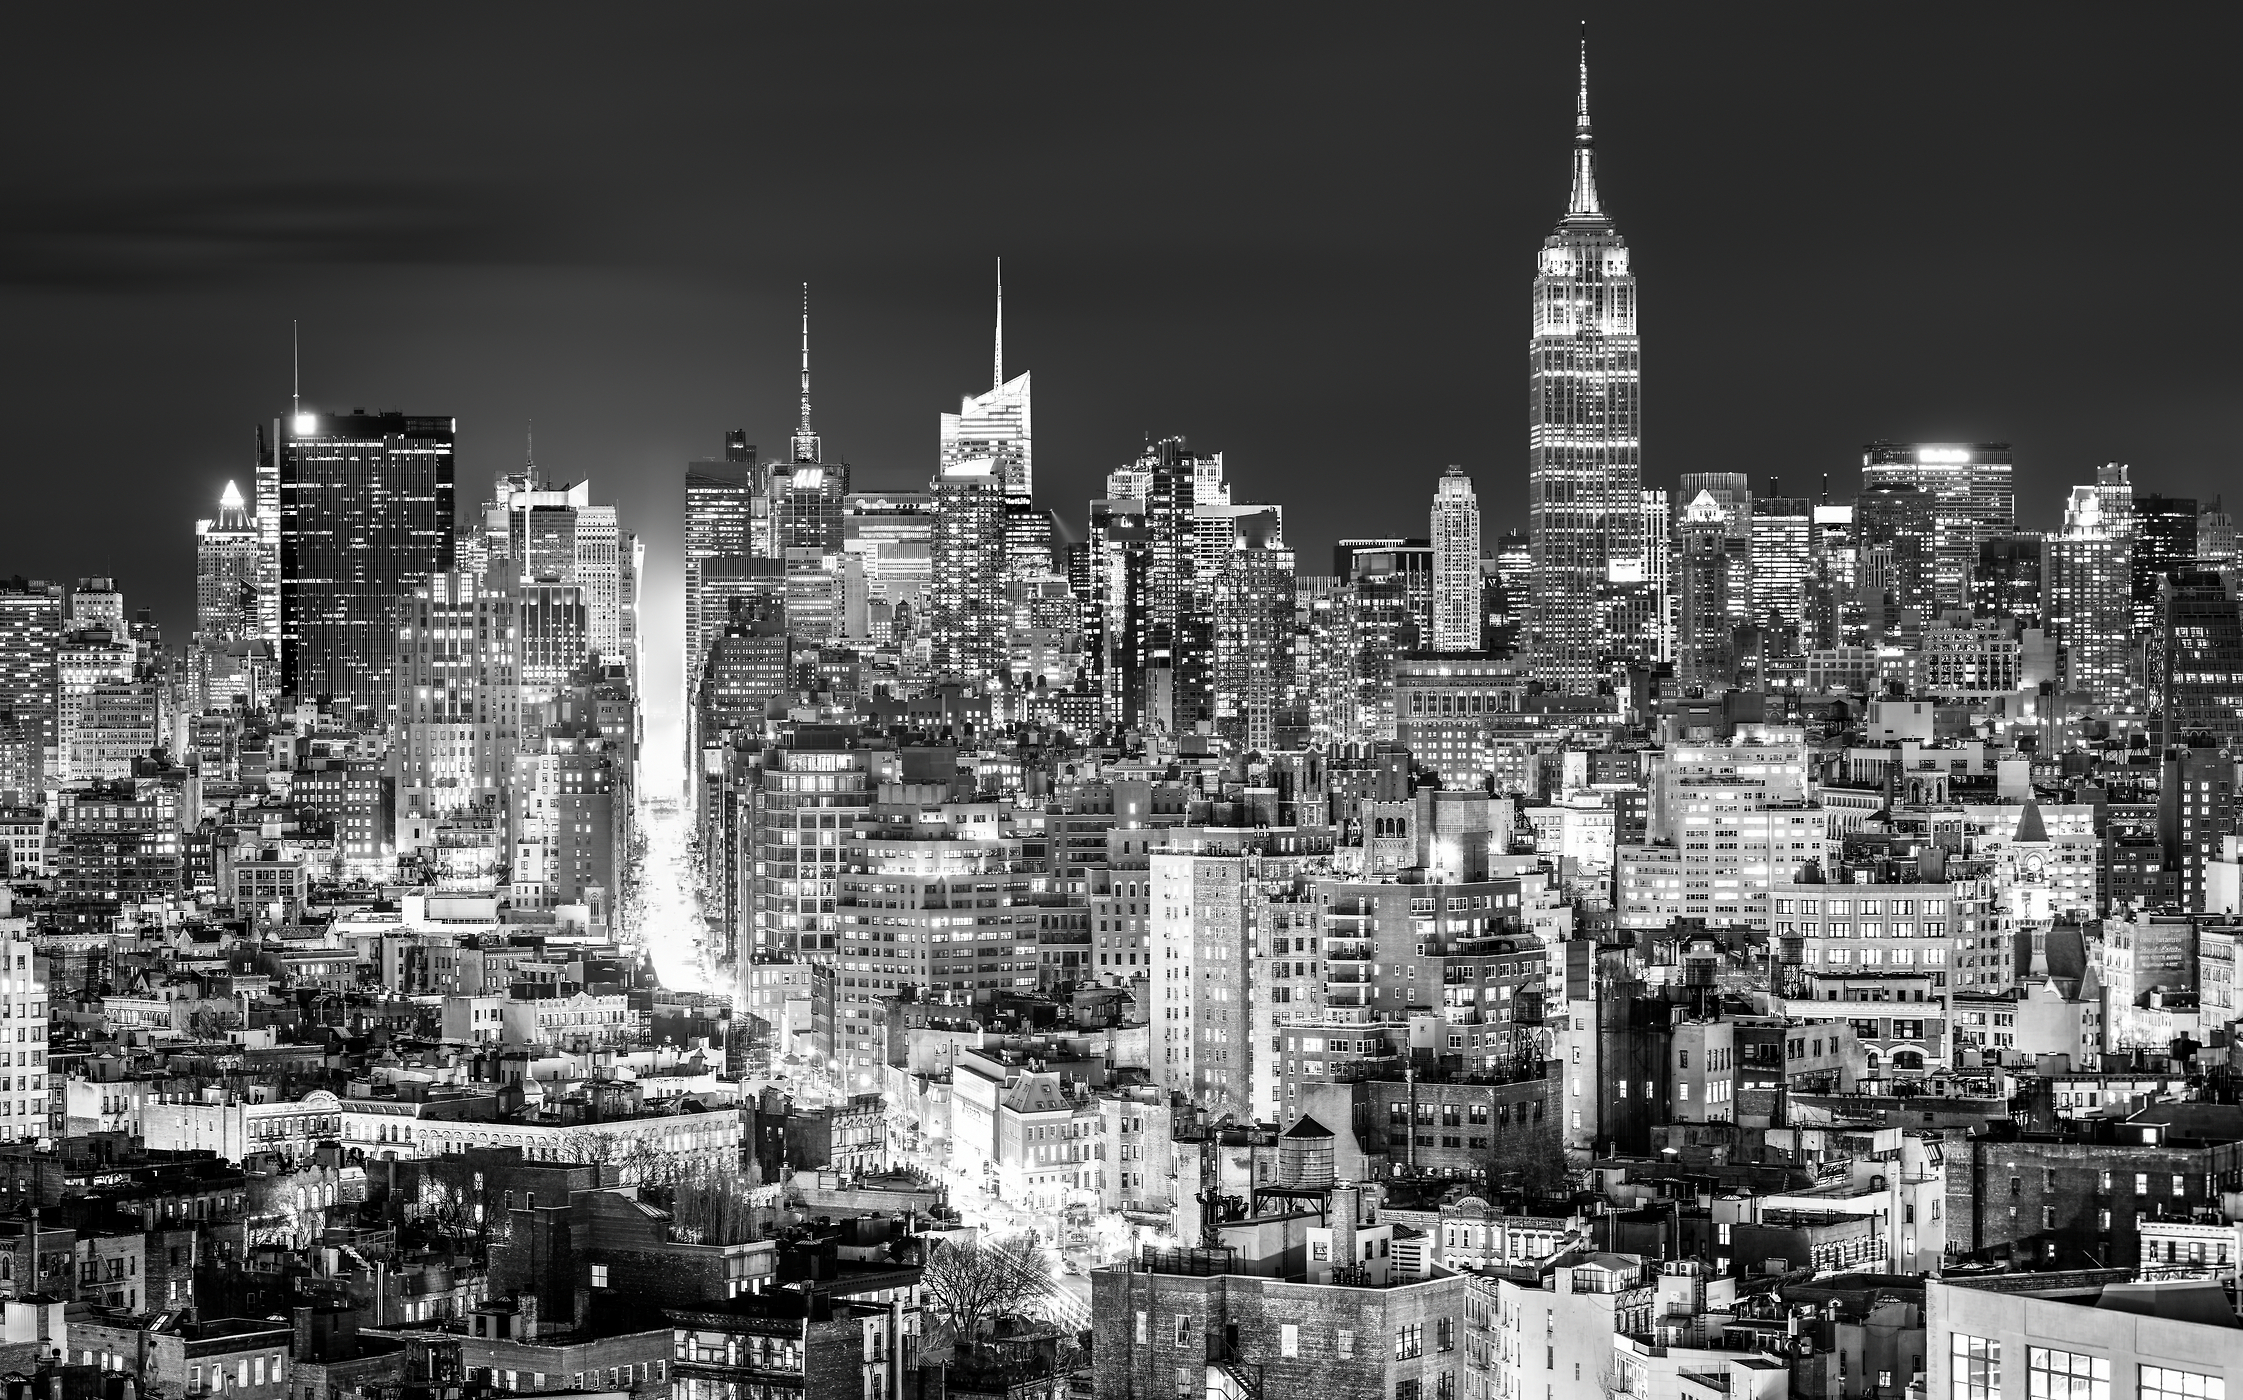 1,105 megapixels! A very high resolution, large-format VAST photo print of the Manhattan, New York City skyline at night; cityscape photo created by Dan Piech